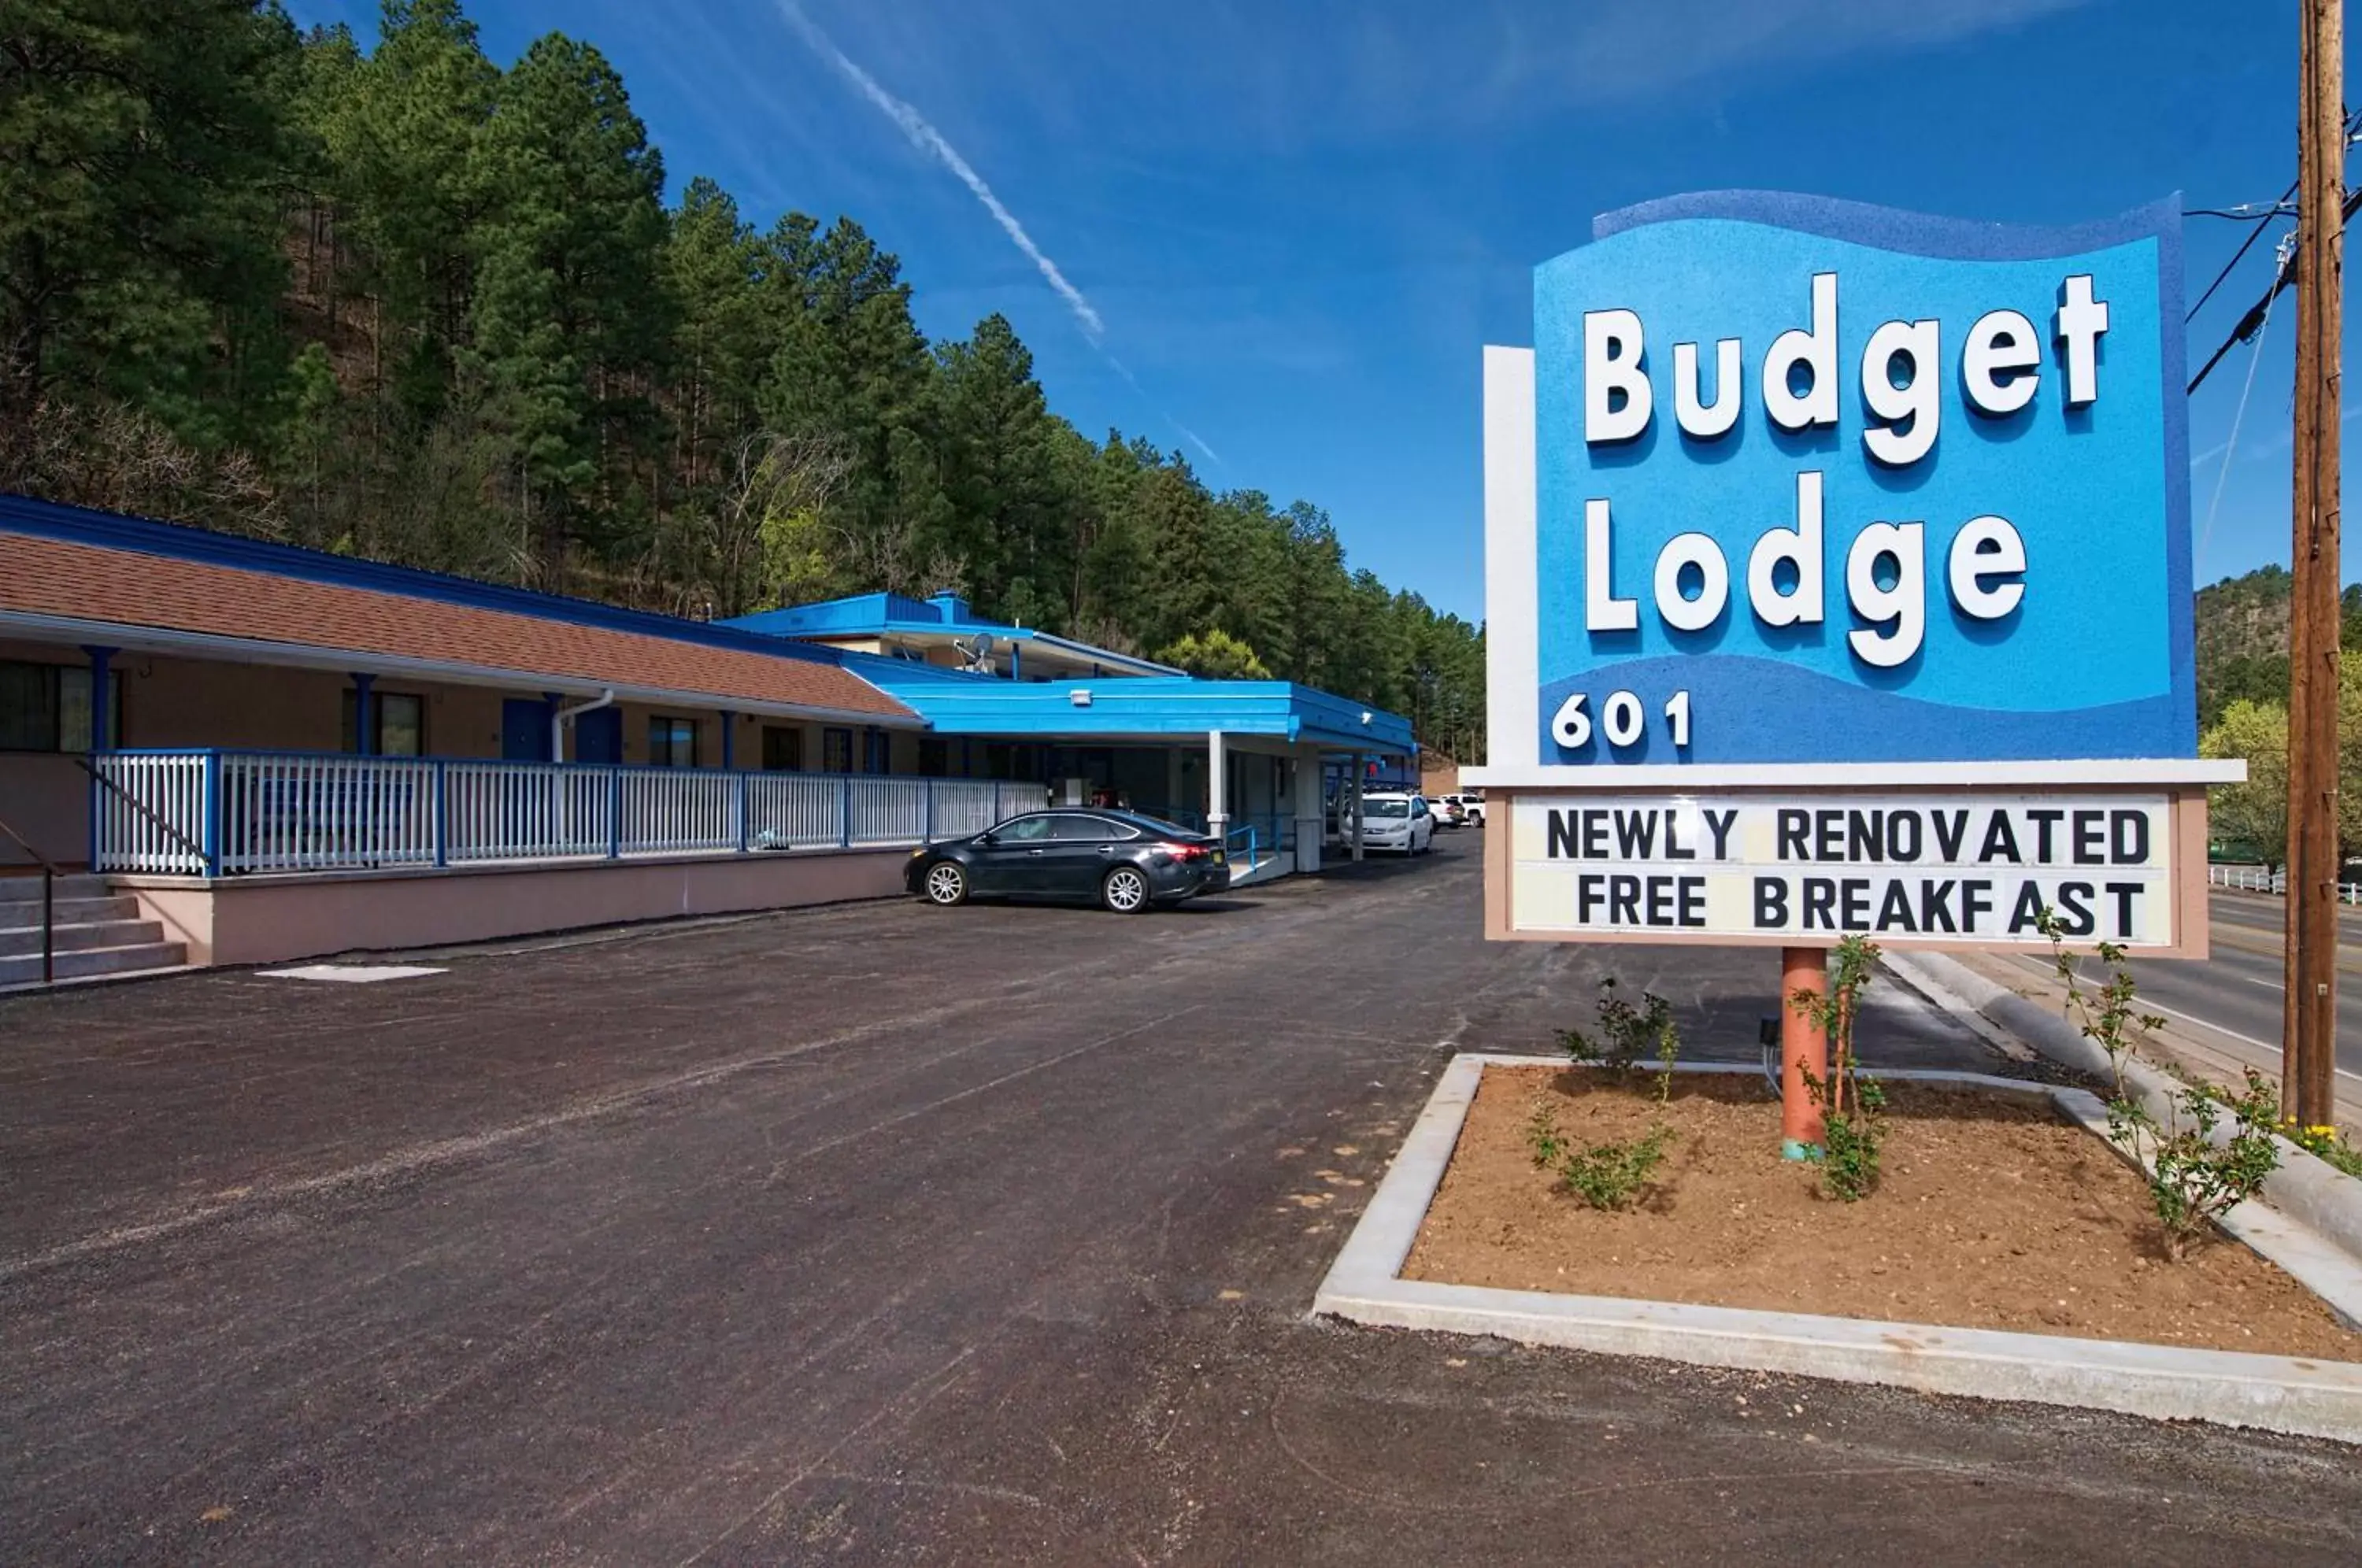 Property logo or sign in Budget Lodge